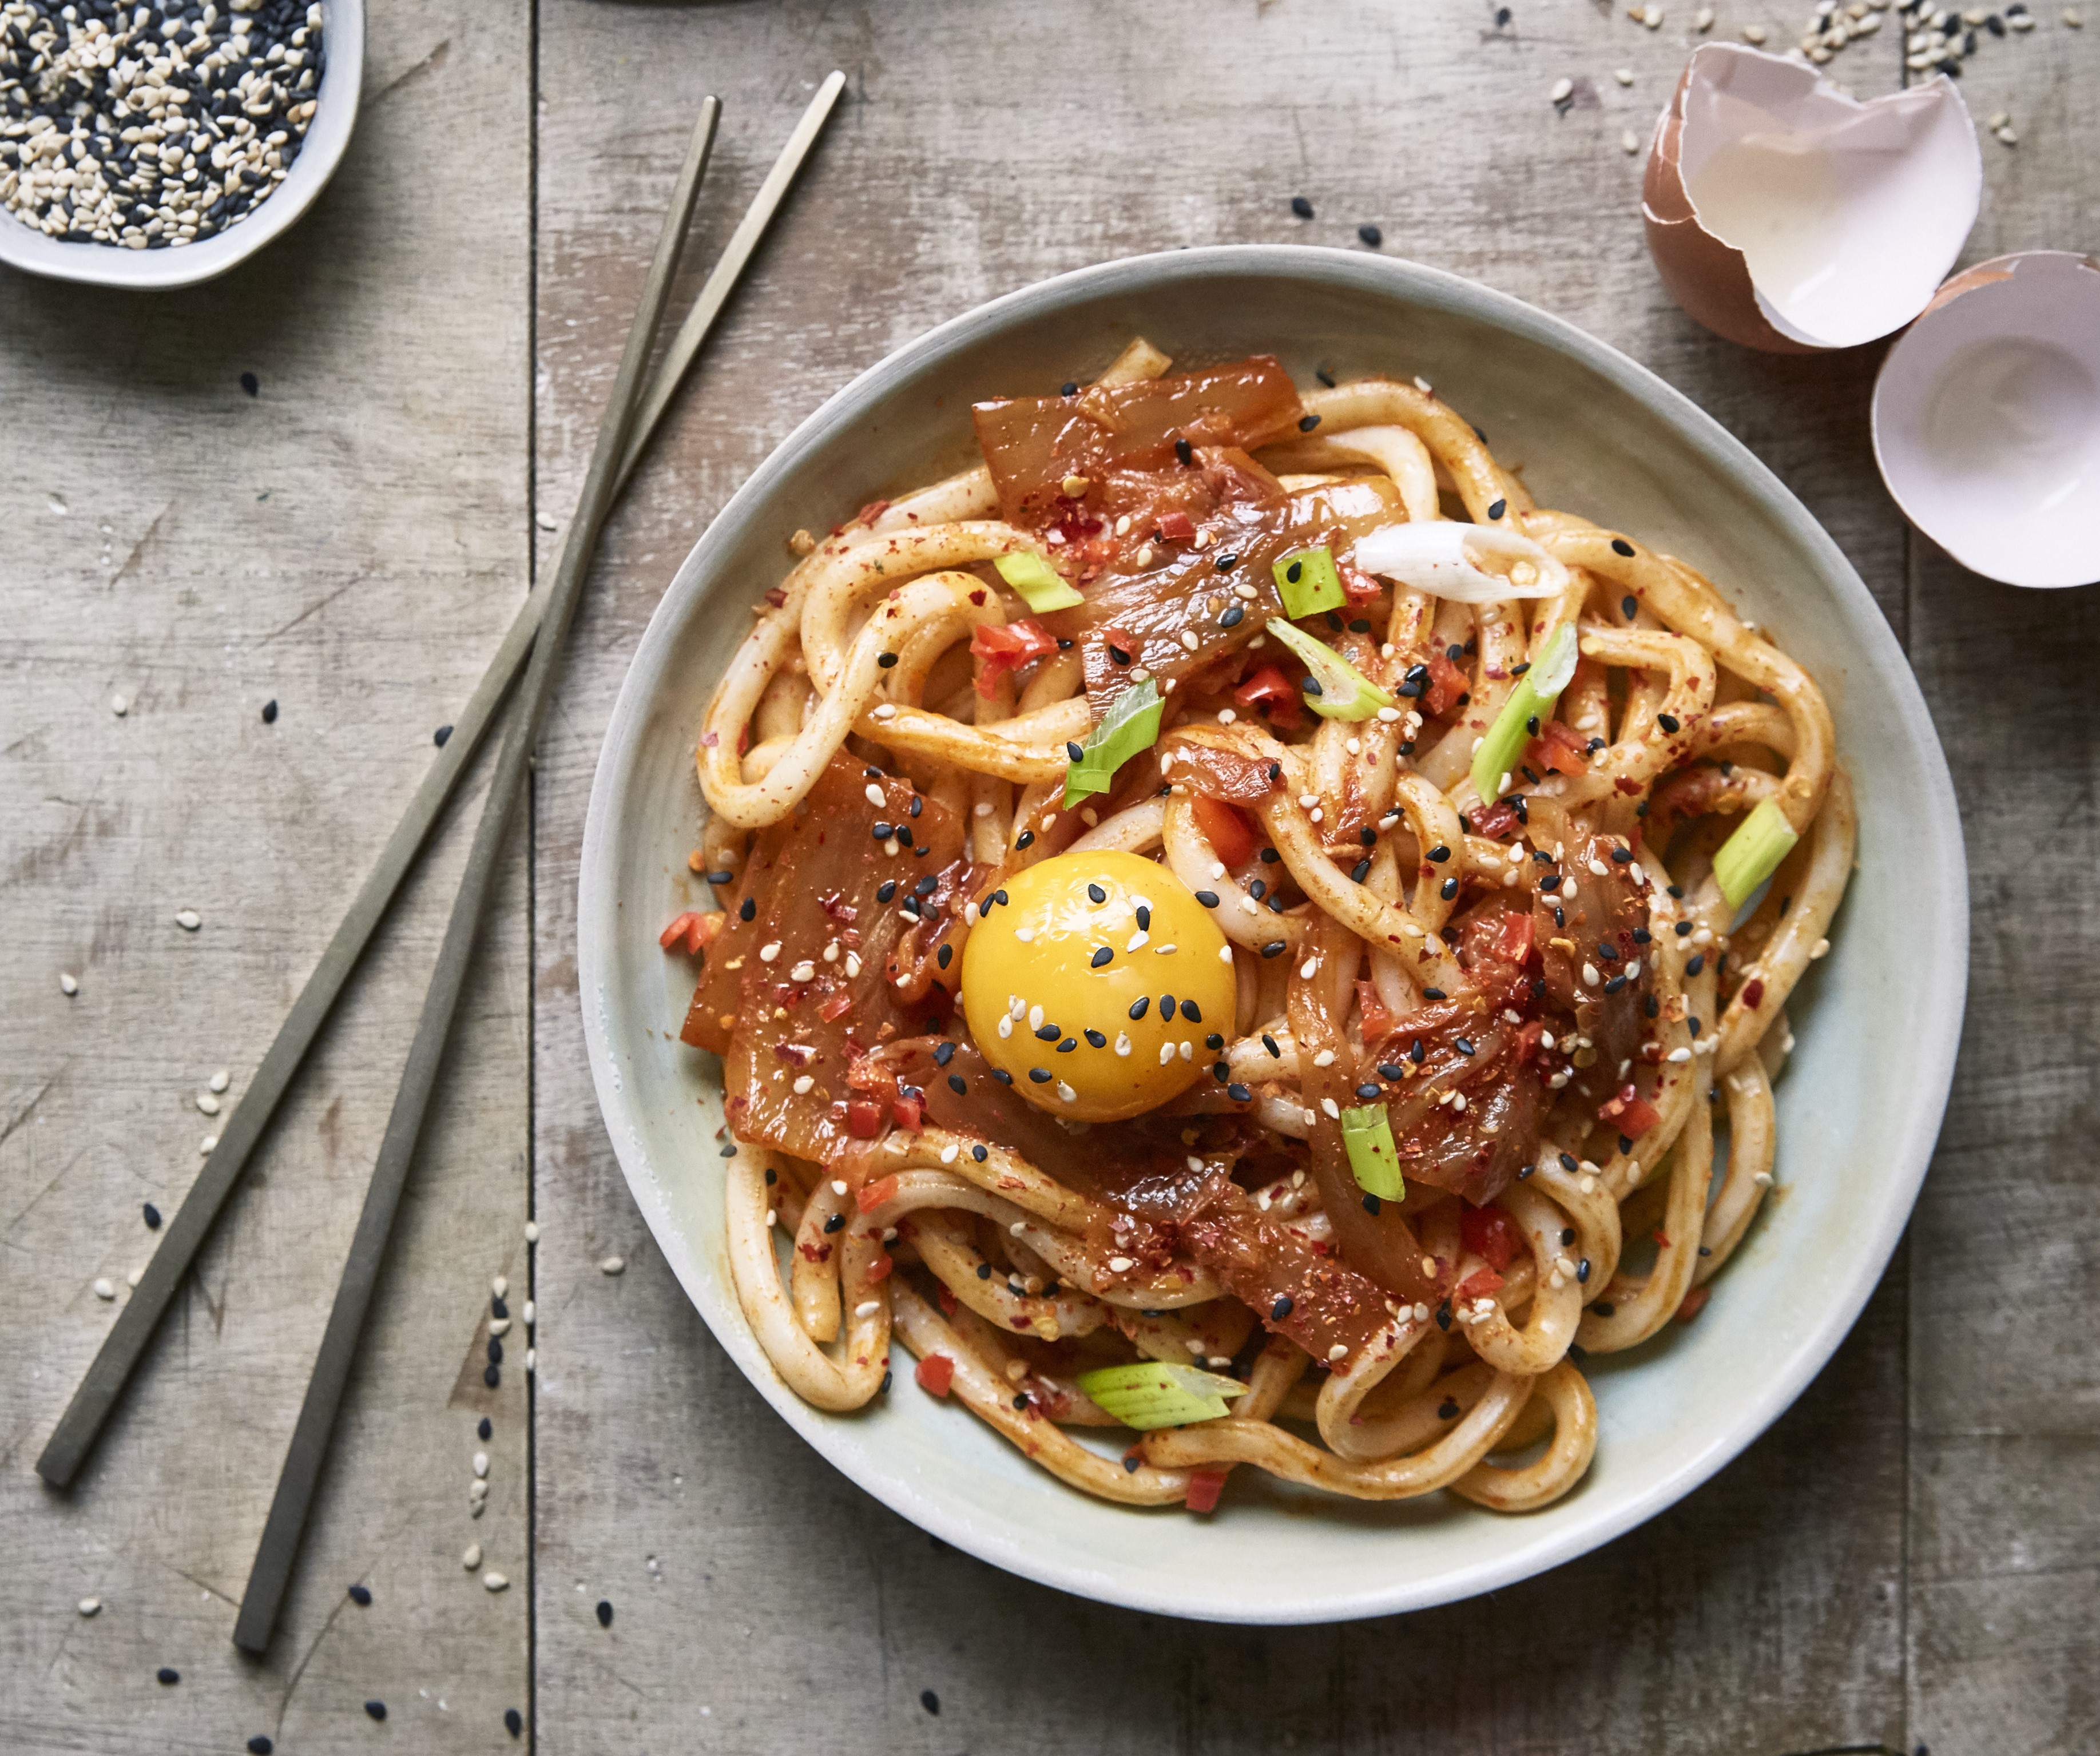 Udon noodles with Kimchi and egg yolk